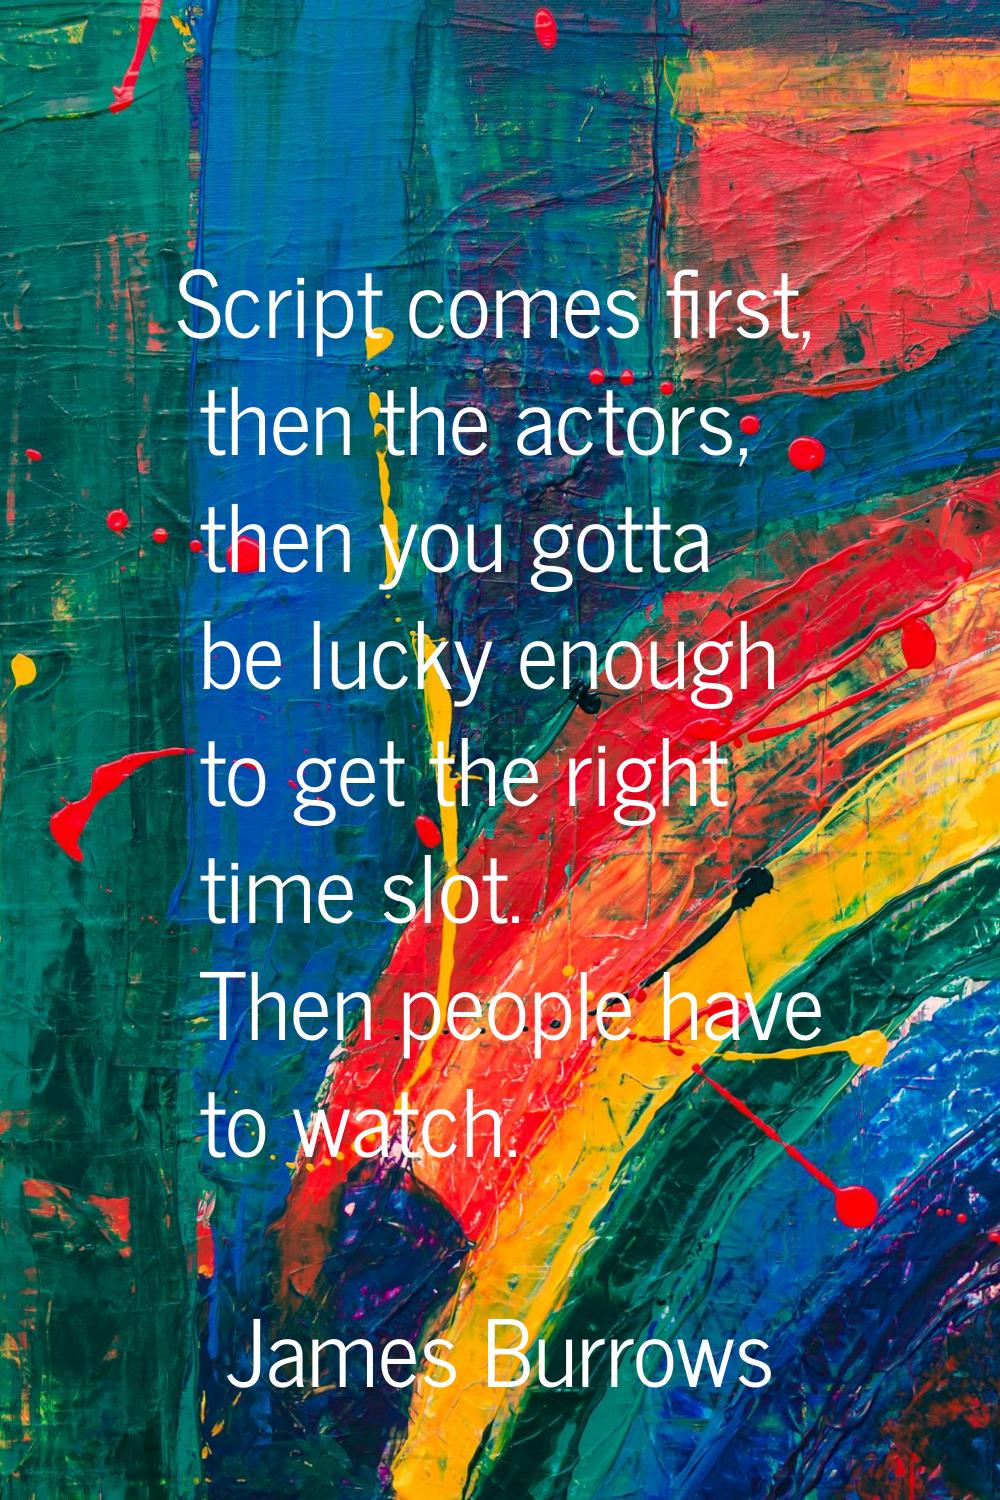 Script comes first, then the actors, then you gotta be lucky enough to get the right time slot. The